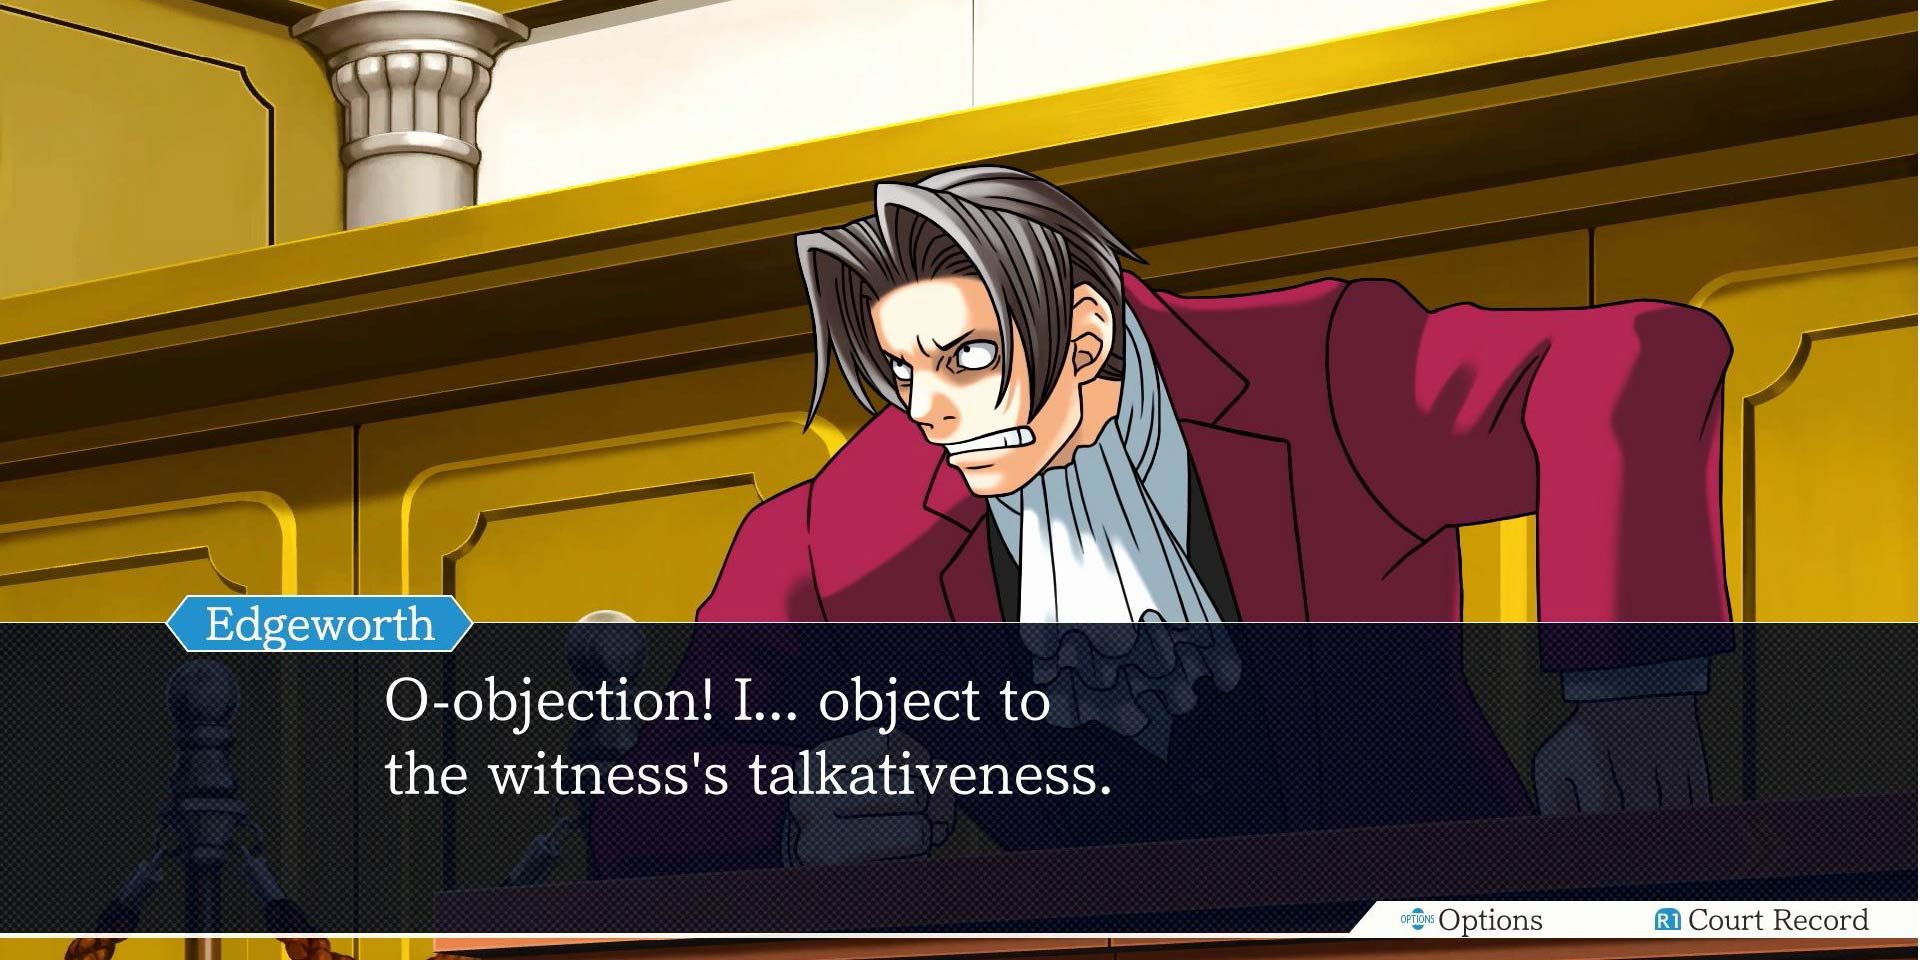 Miles Edgeworth from Ace Attorney raising an objection while flustered.